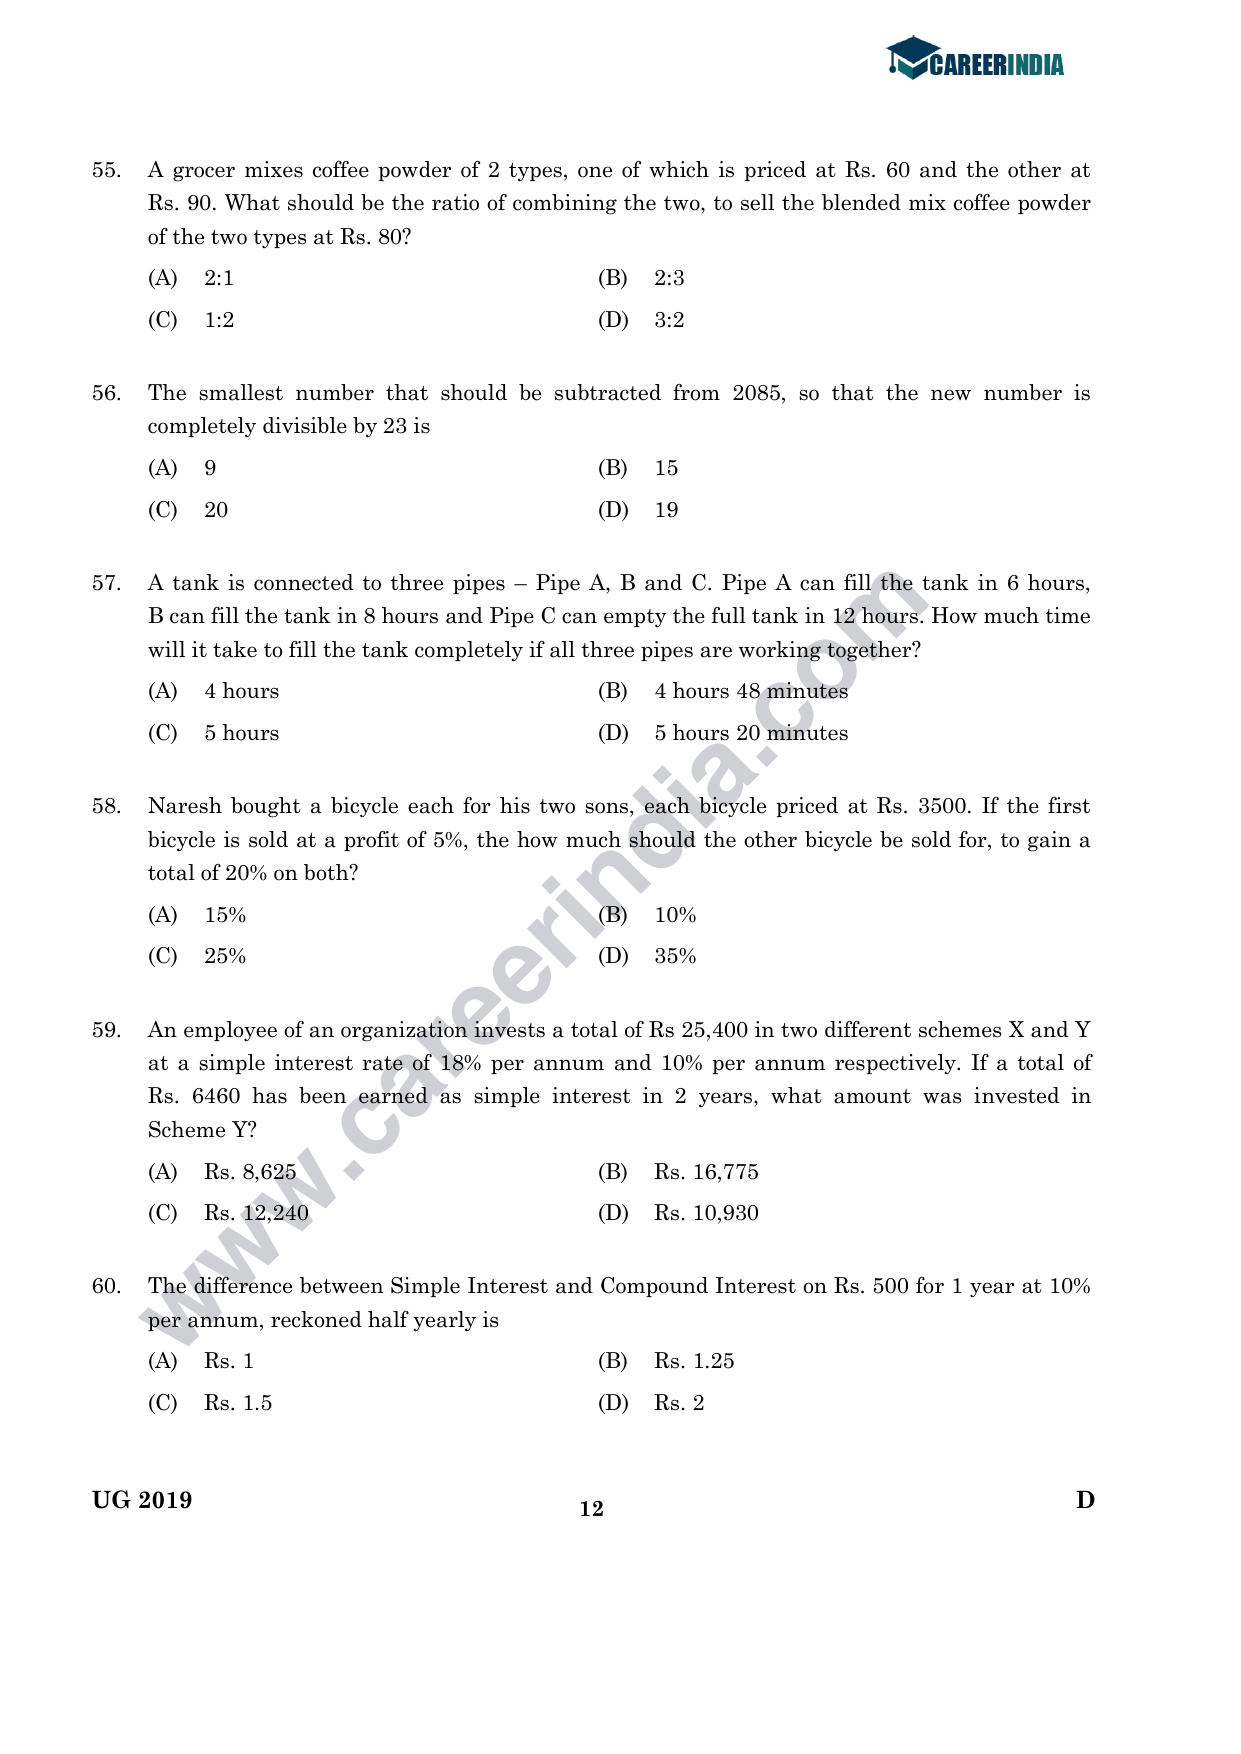 CLAT 2019 UG Logical-Reasoning Question Paper - Page 11